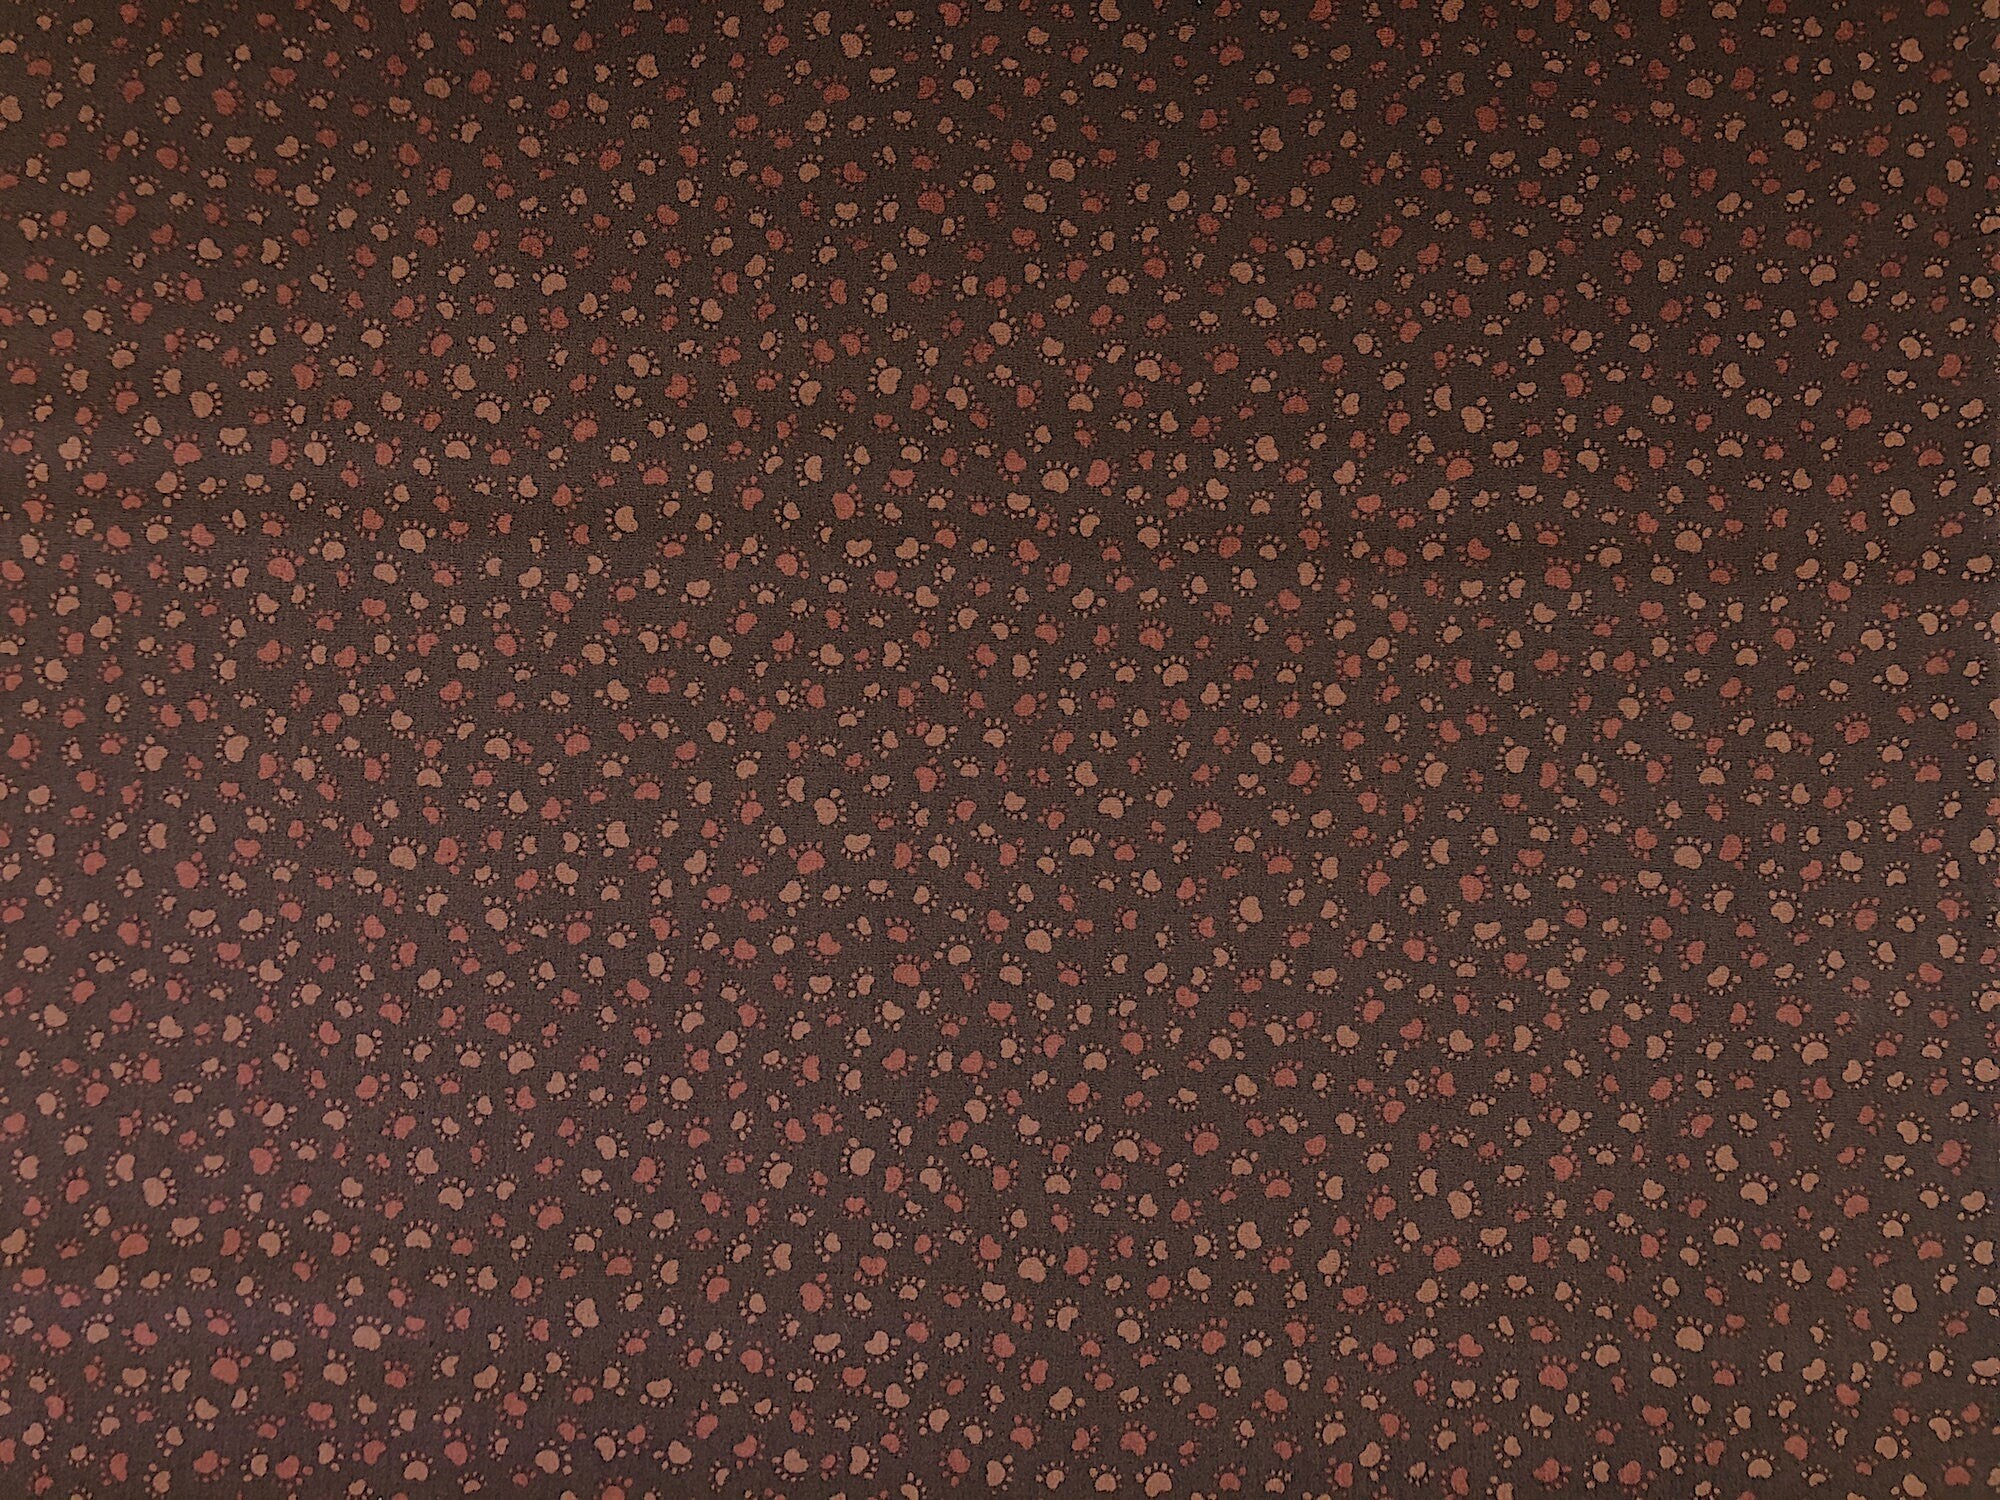 This brown fabric is called Where's The Cat and is covered with brown paw prints.